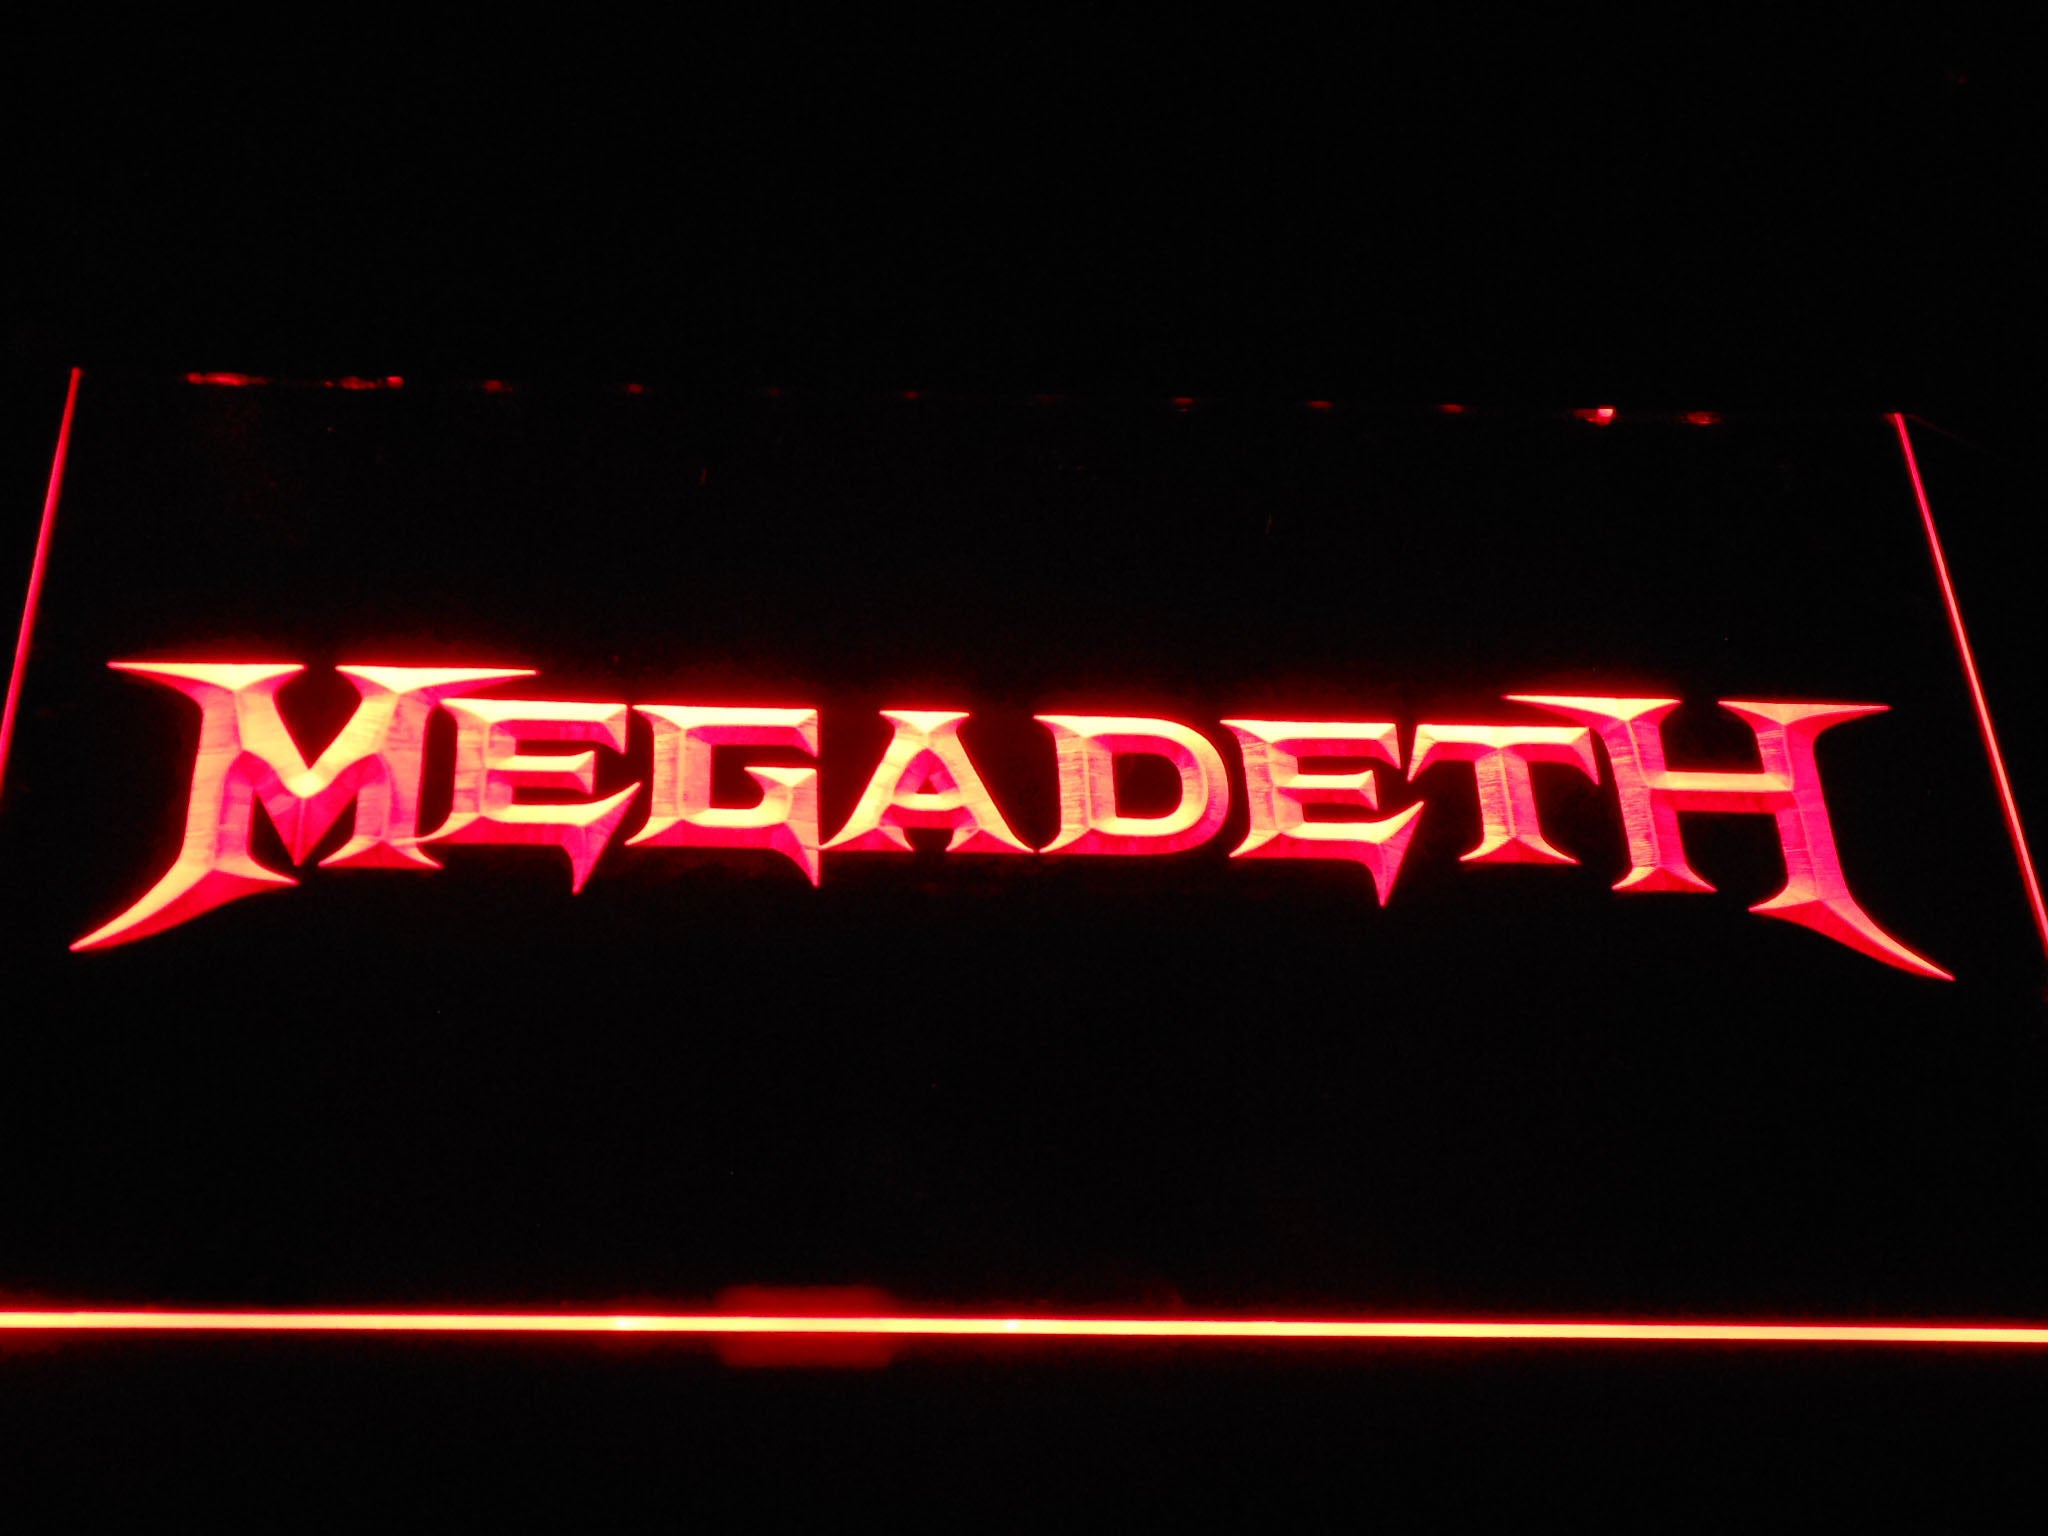 Megadeth American Heavy Metal Band LED Neon Sign